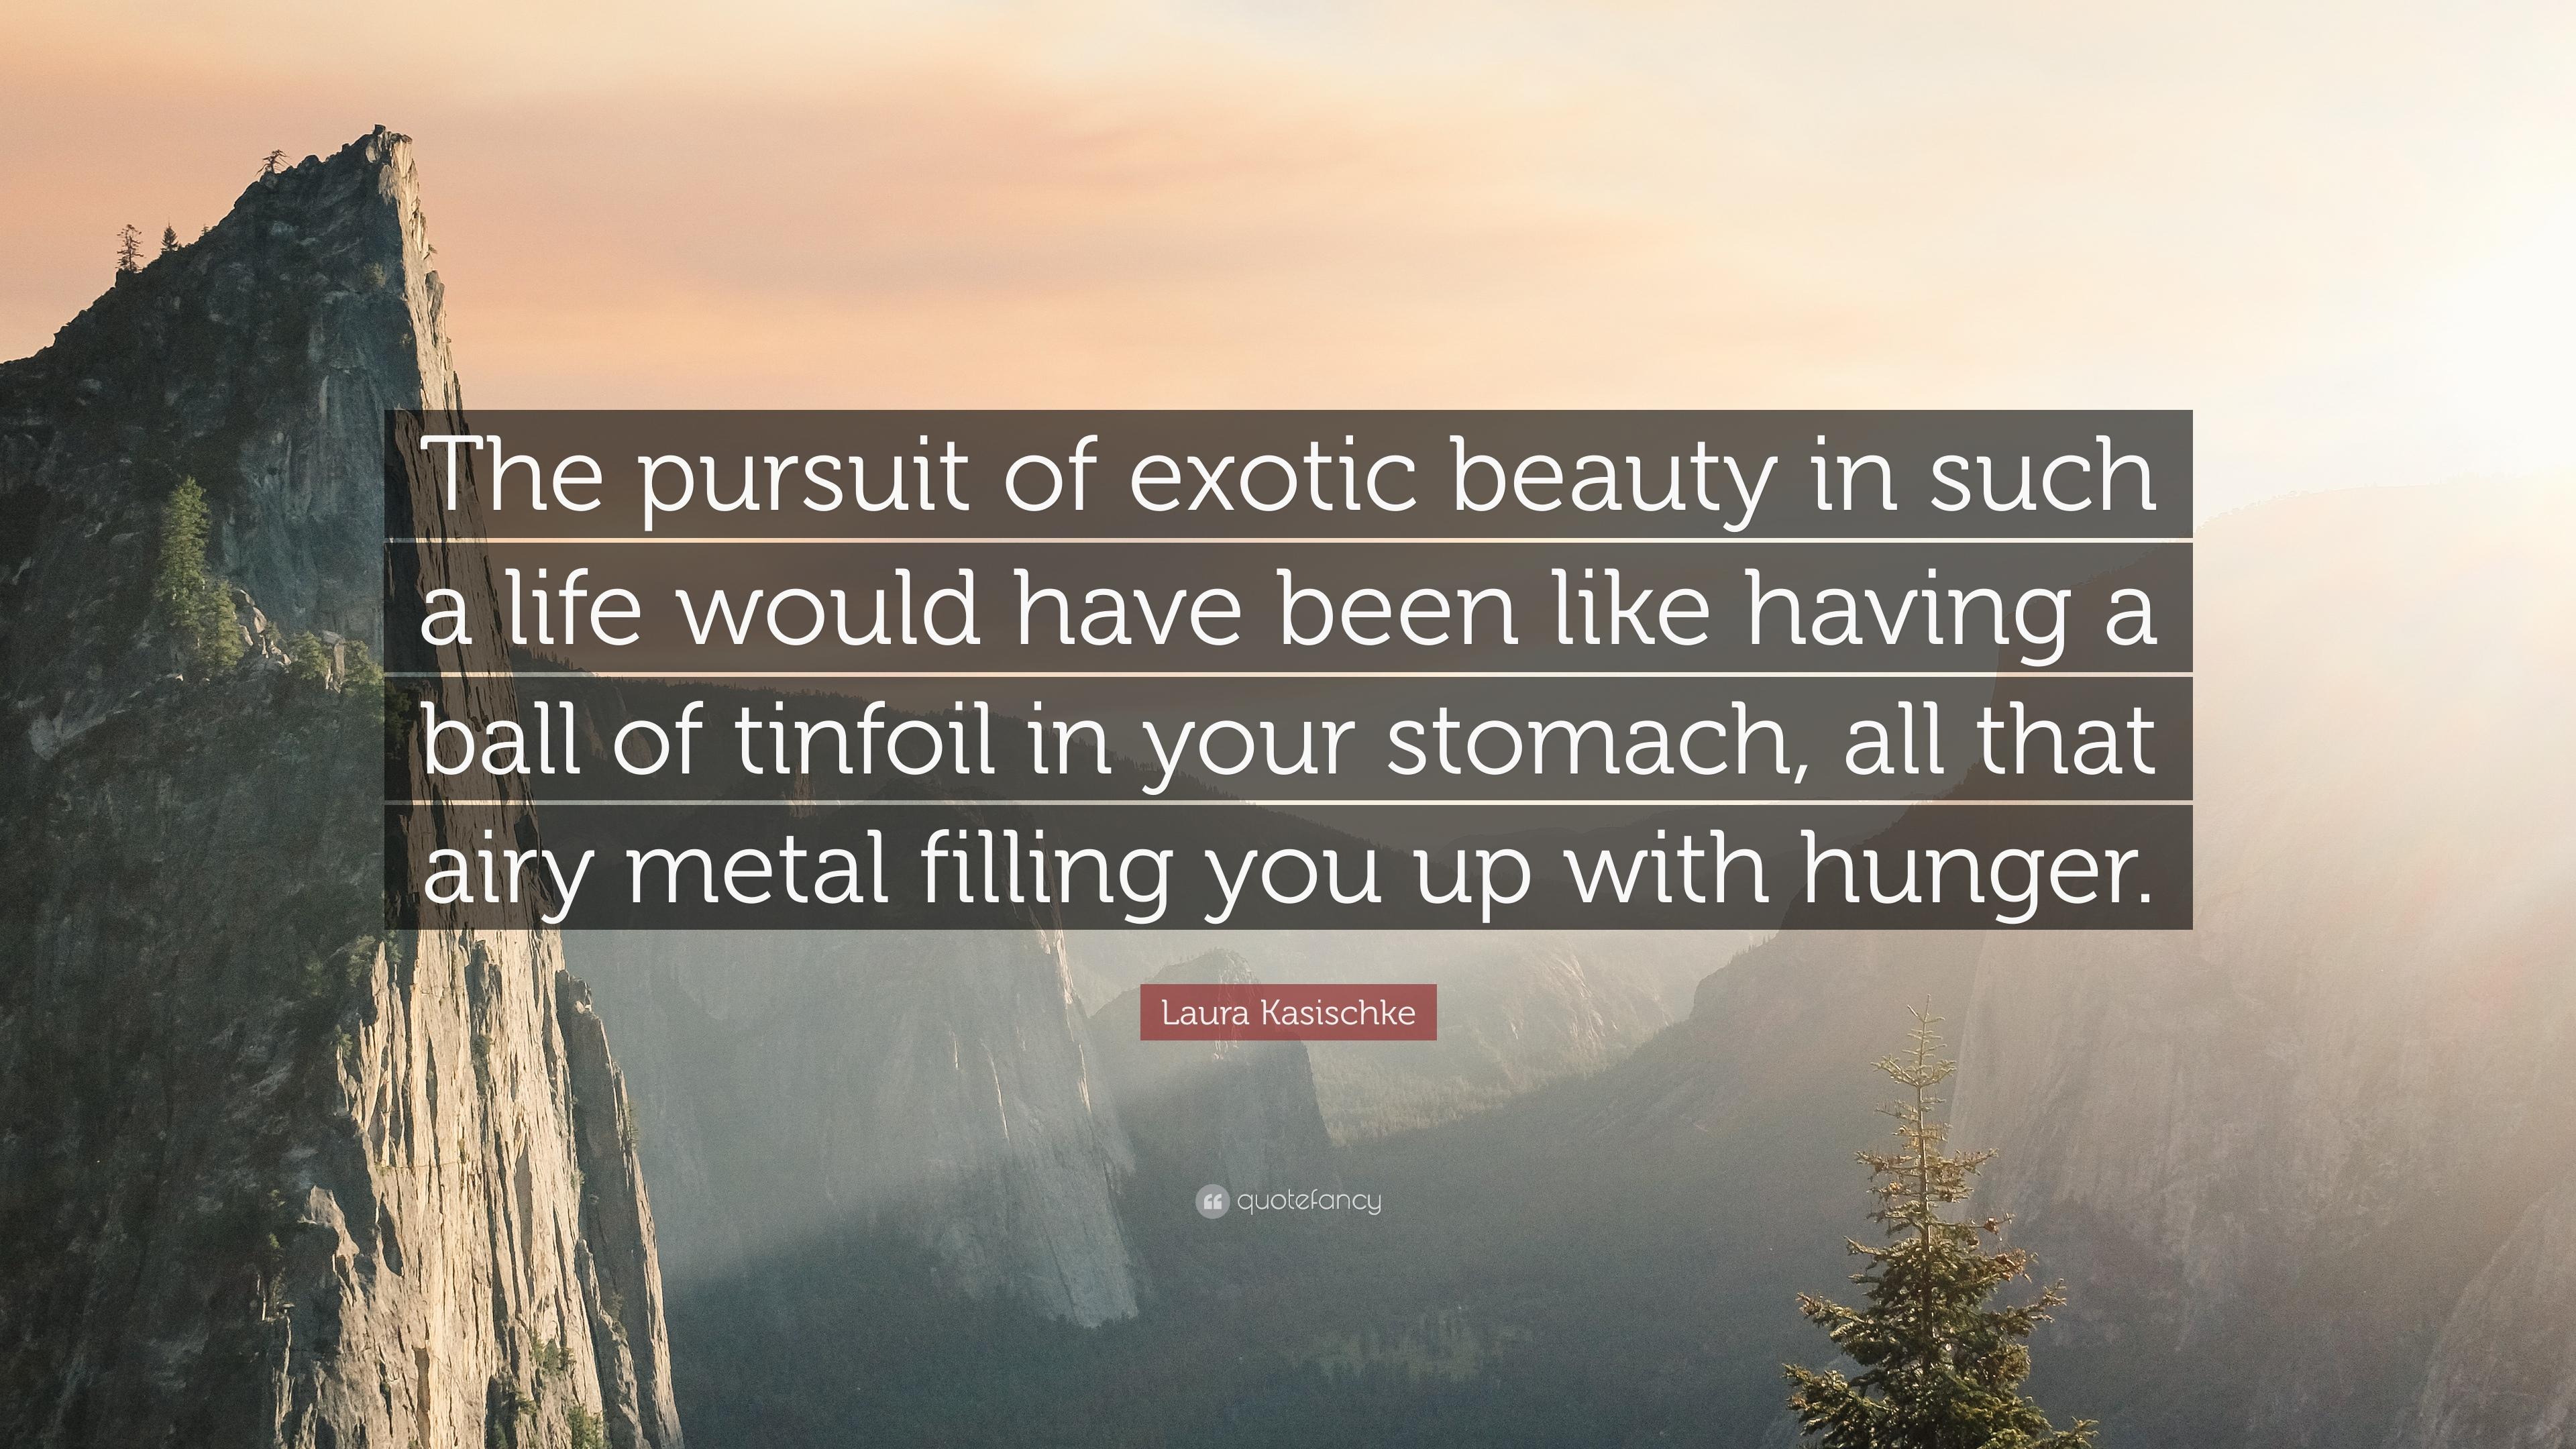 Laura Kasischke Quote: “The pursuit of exotic beauty in such